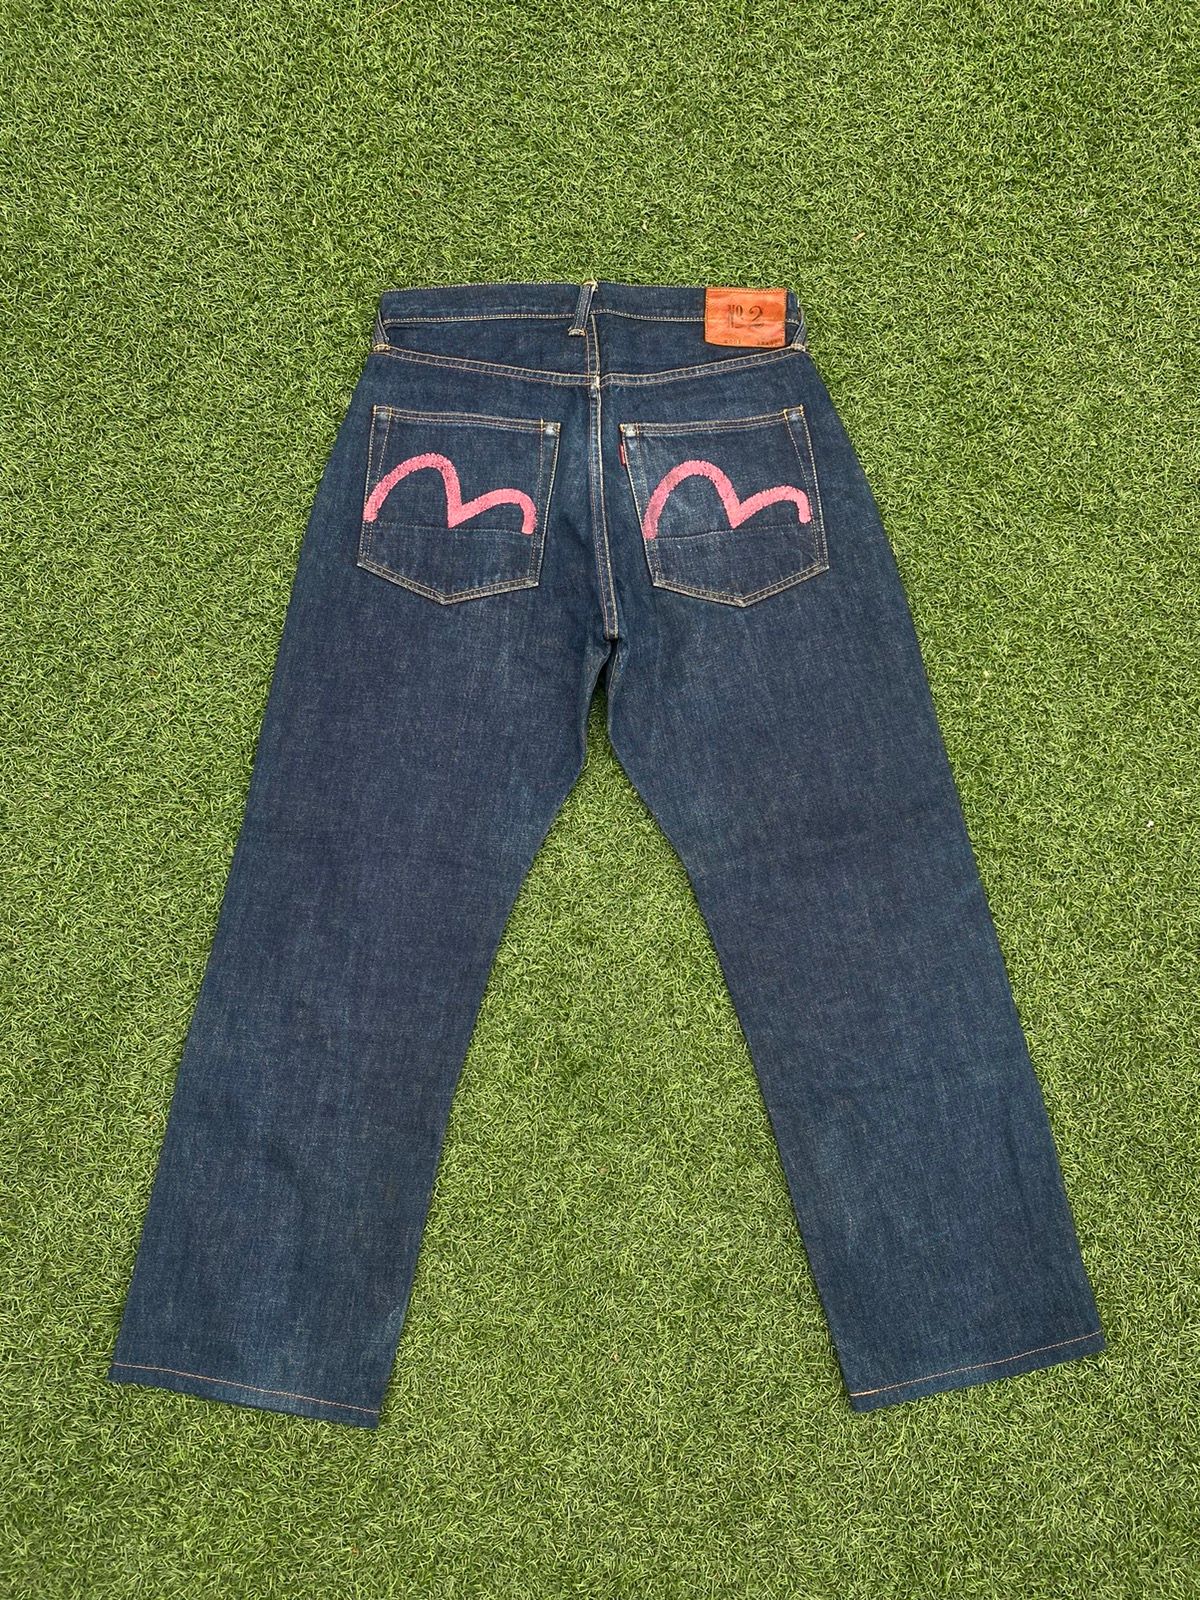 Pre-owned Evisu Jeans No.2 Pink Sea Gulls Made In Japan Selvedge In Denim